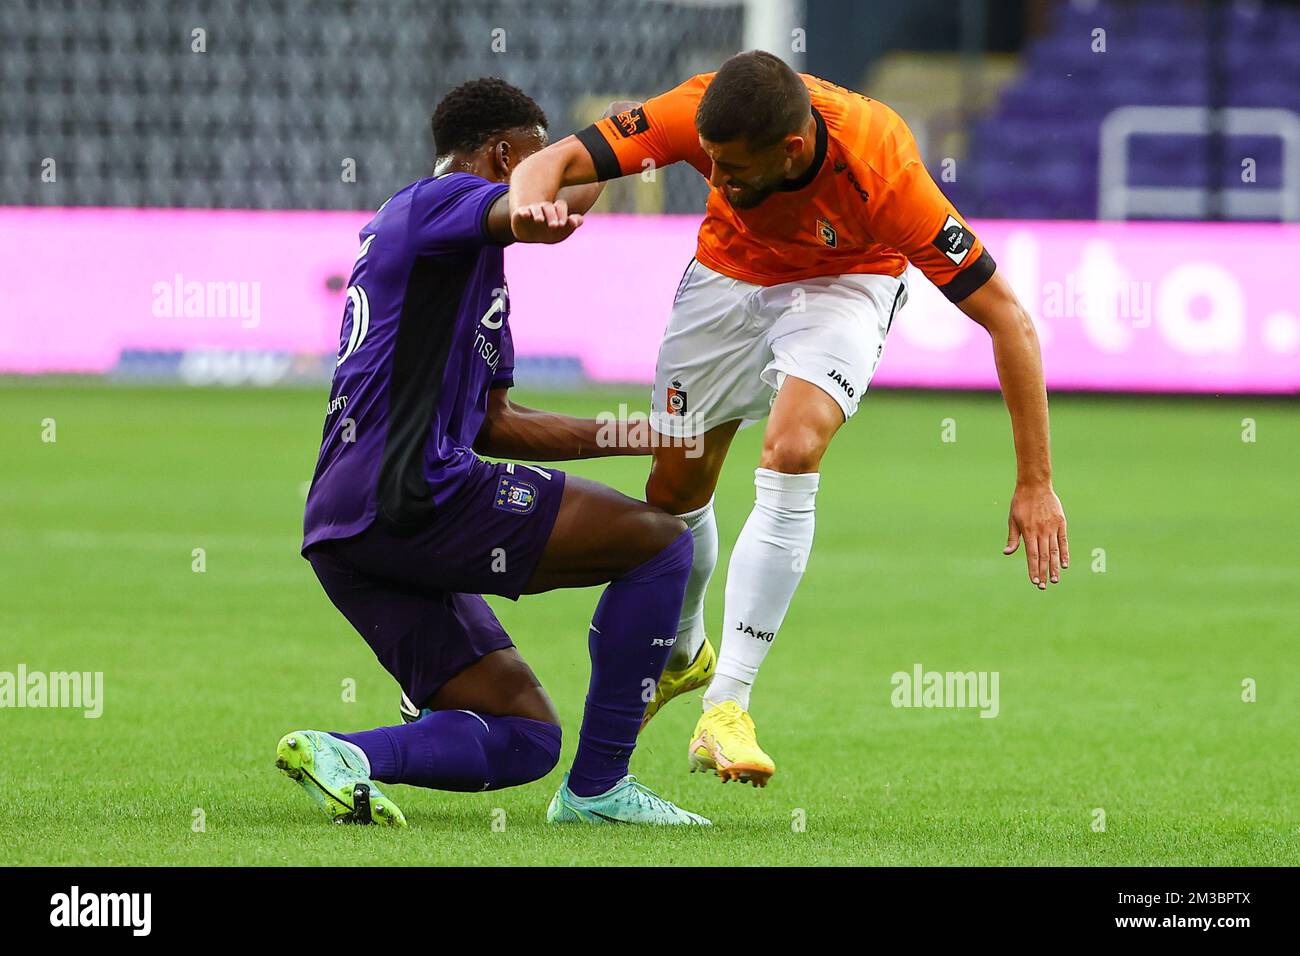 RSCA Futures' Simion Michez and Deinze's Dylan De Belder fight for the ball  during a soccer match between RSC Anderlecht Futures and KMSK Deinze,  Sunday 14 August 2022 in Anderlecht, on day